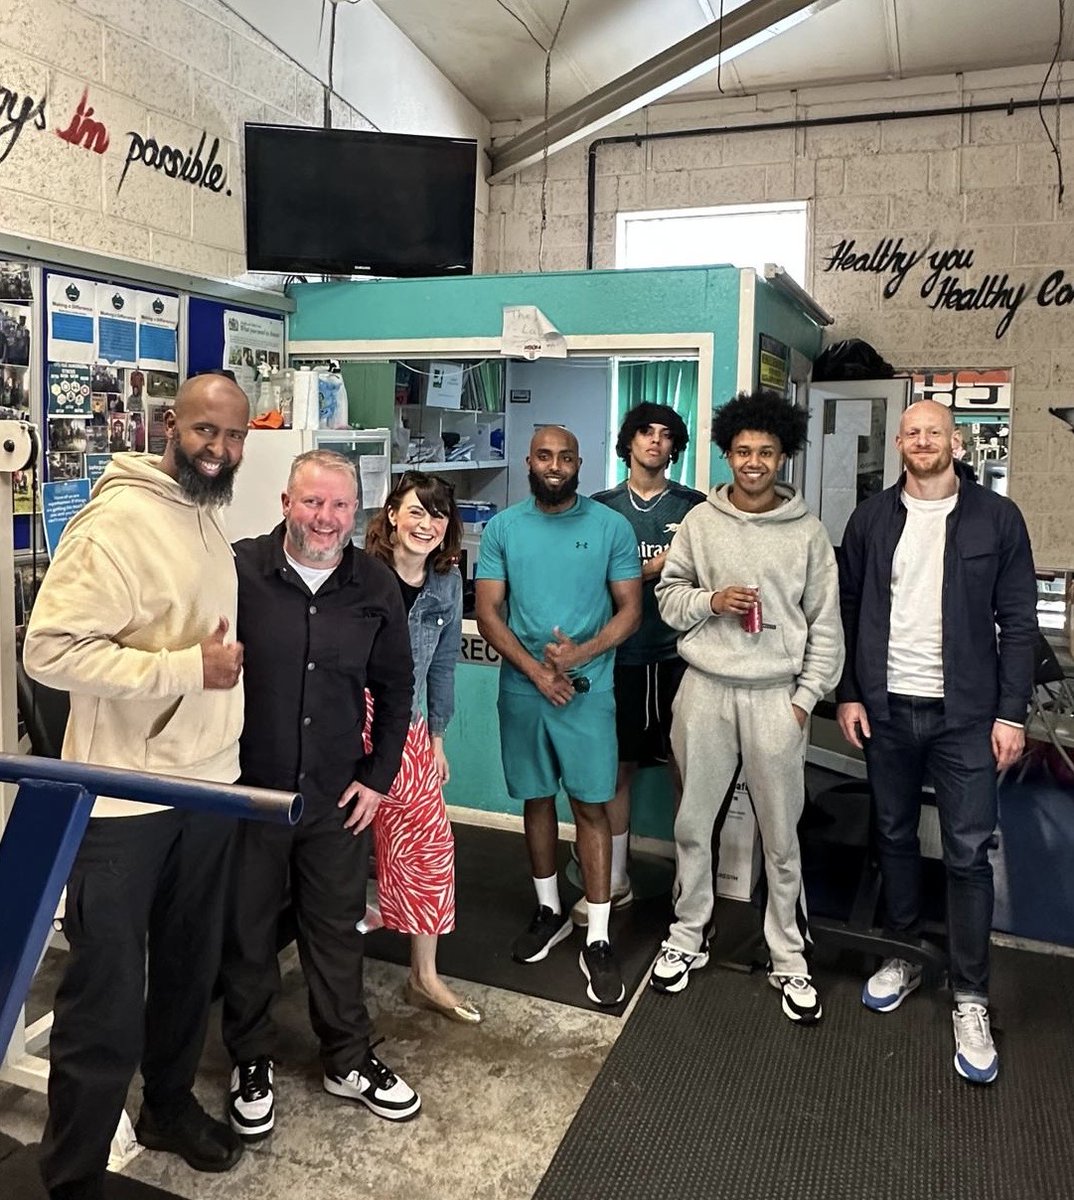 Nice visit today from some friends in the North East @StephanieO18 @NEYouth_ @JonNiblo. We've been building on the great work of our own youth leaders @Khaliil_Ali98 @TheRealOzzyB talking mental health, stigma & the role of community orgs. More to come #TeamUnity #CiviAct #TheLab